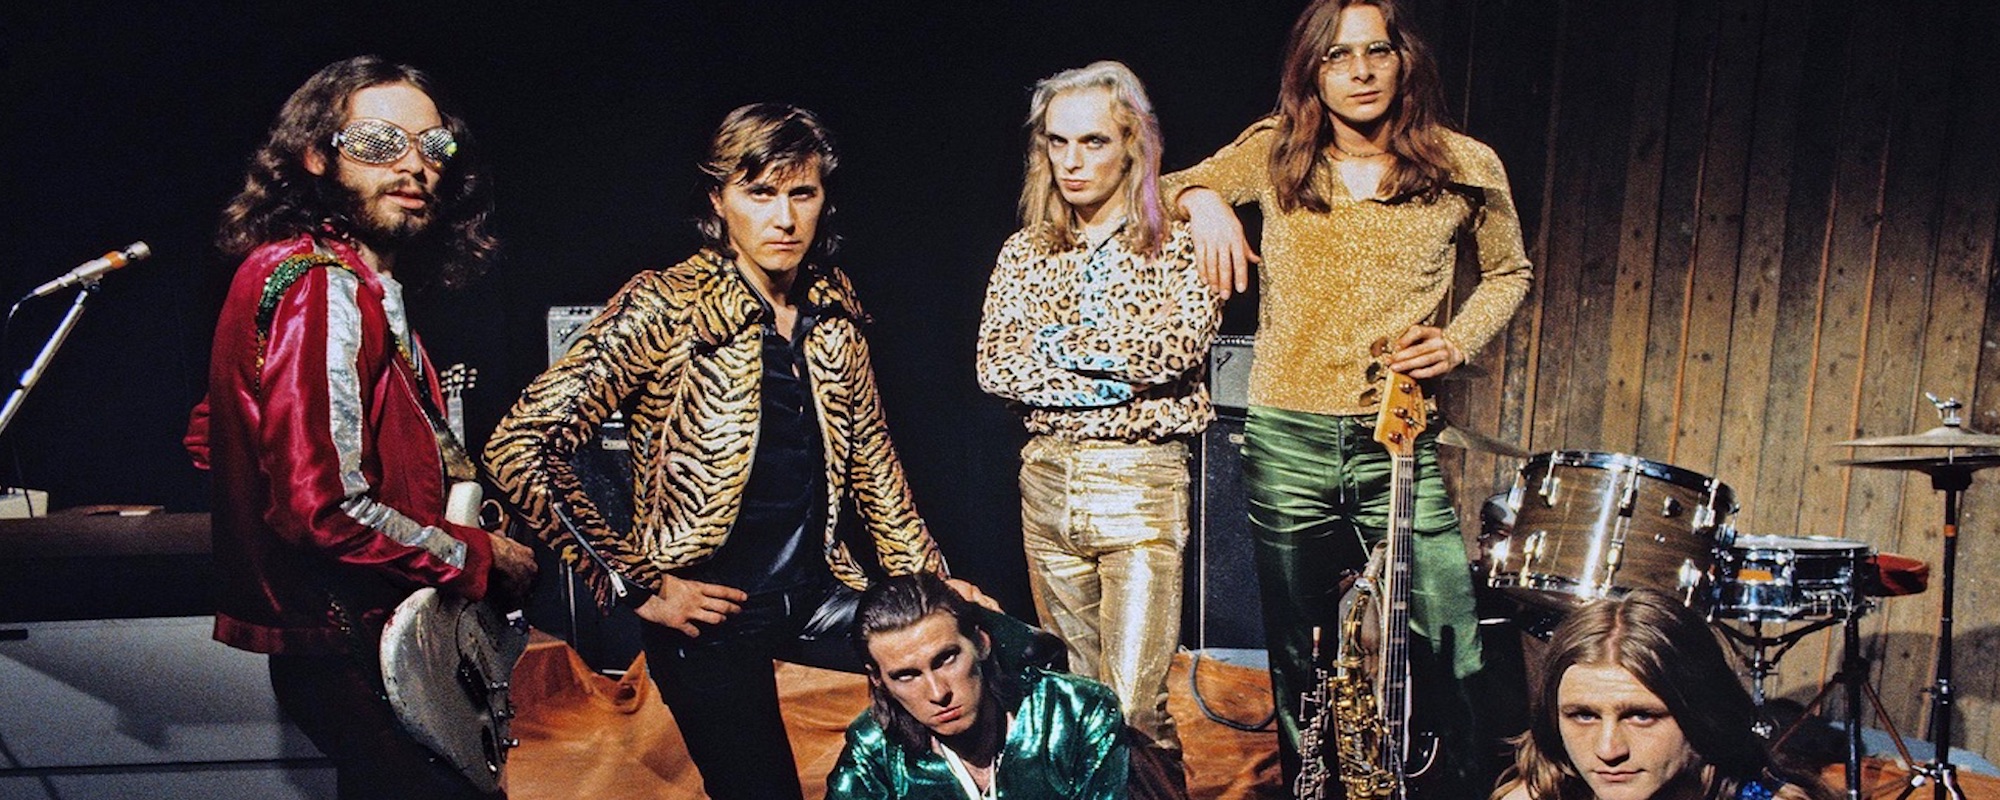 Roxy Music Celebrate 50th Anniversary with North American, U.K. Tour with St. Vincent